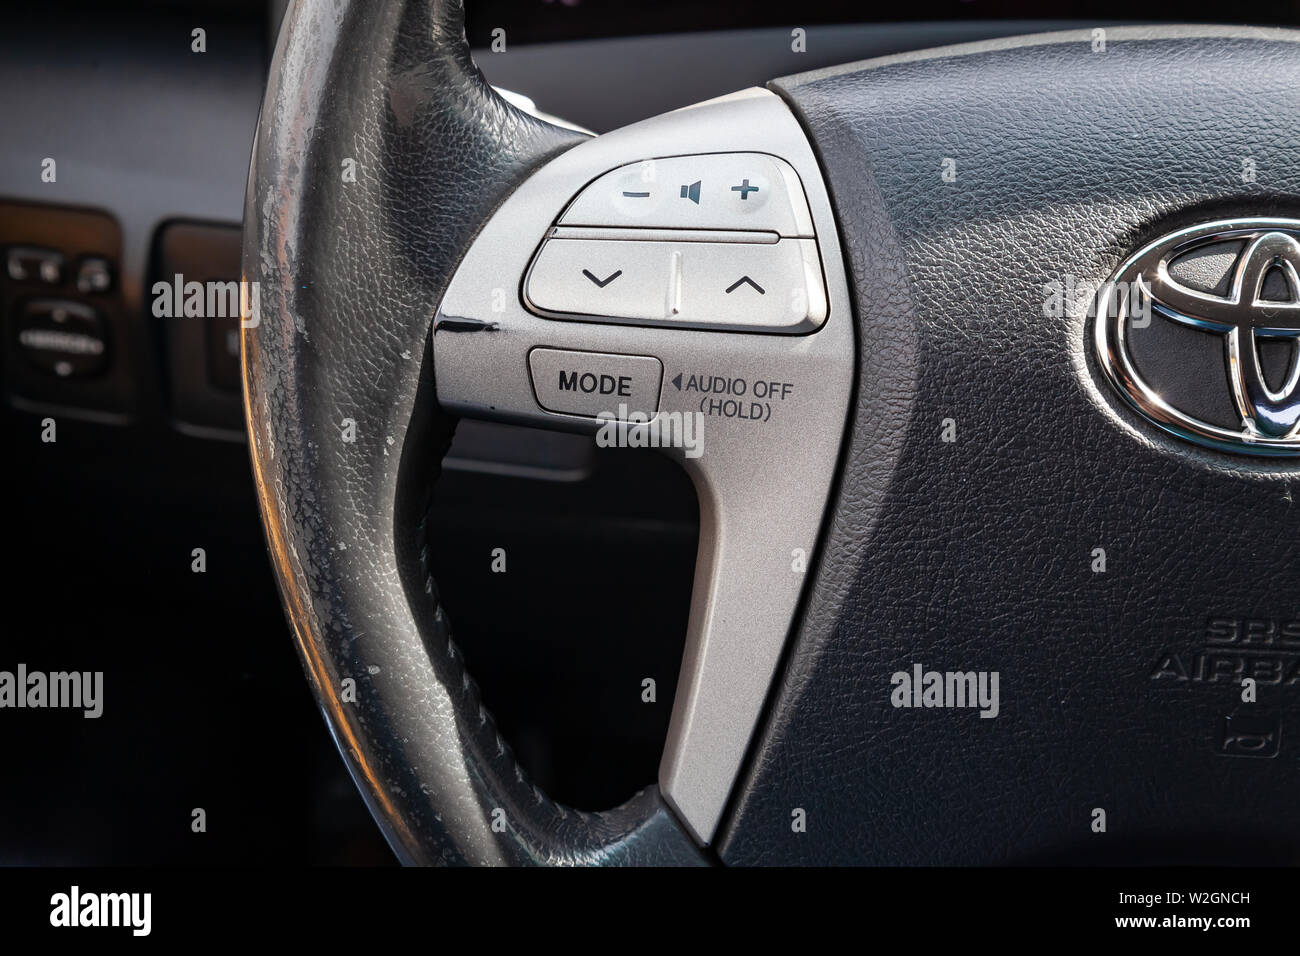 Novosibirsk, Russia - 07.09.2019: View to the interior of Toyota Camry 2006 with steering wheel with audio control buttons after cleaning before sale Stock Photo